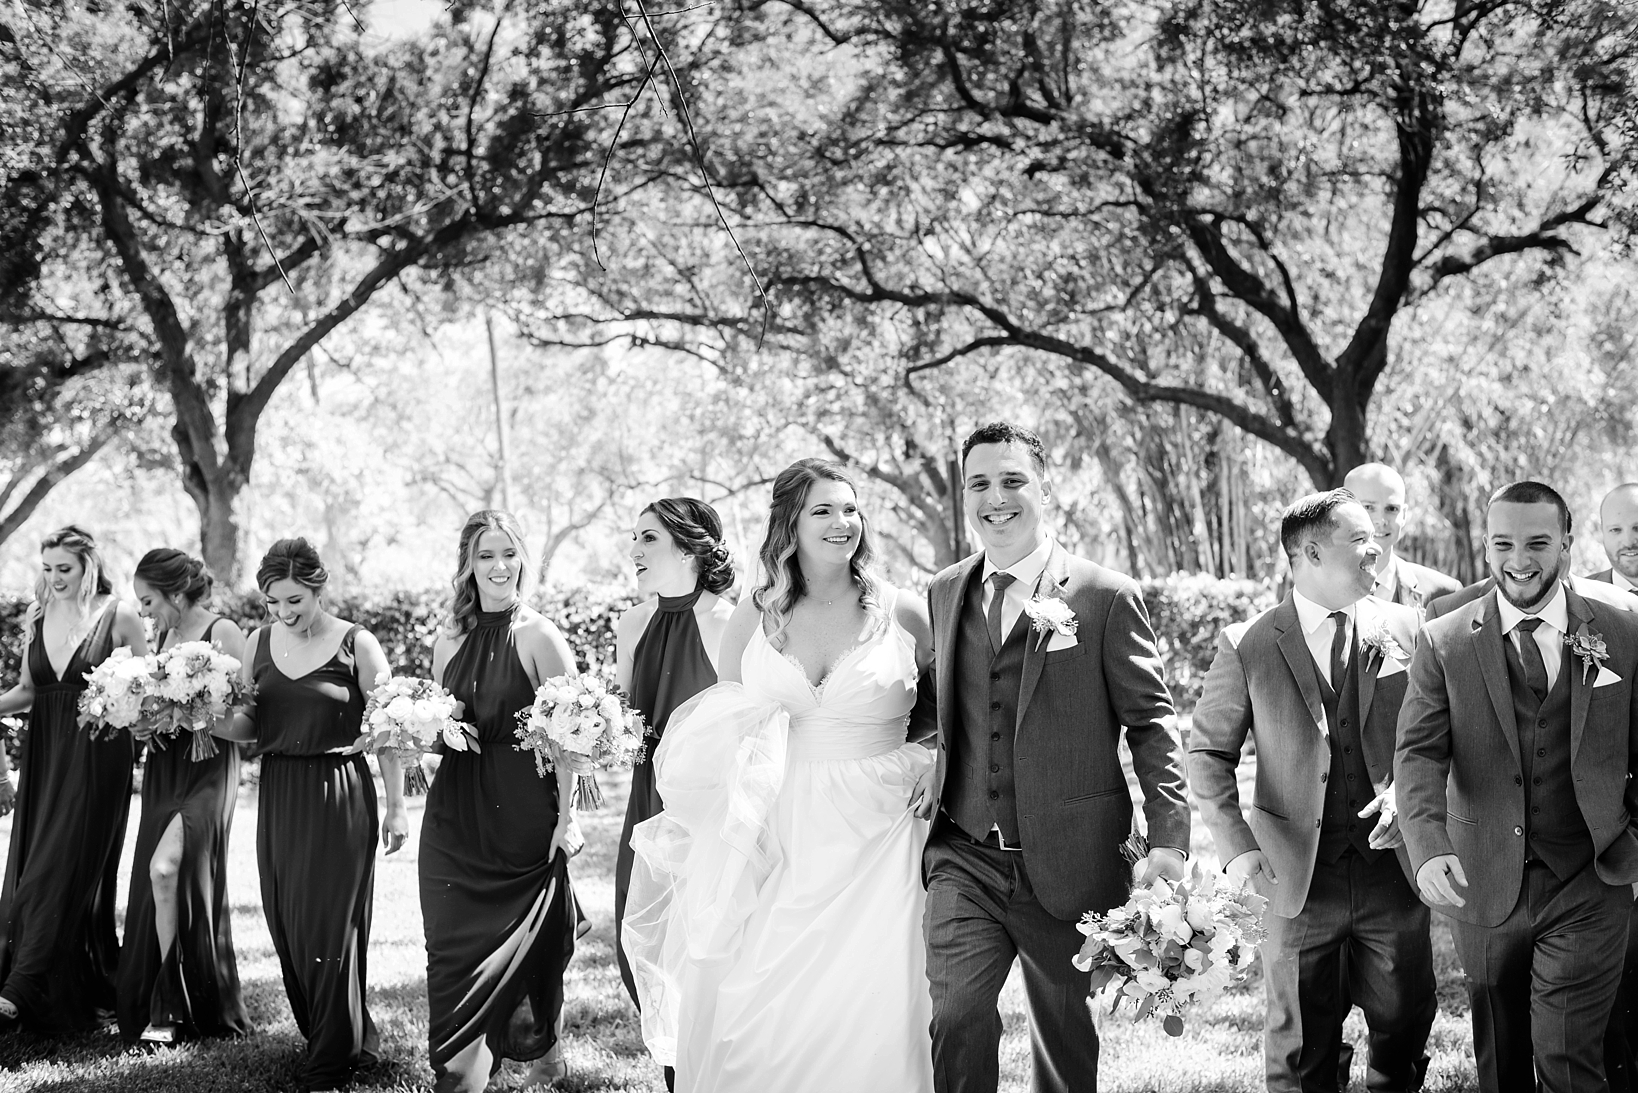 Bride and Groom with their wedding party in black and white